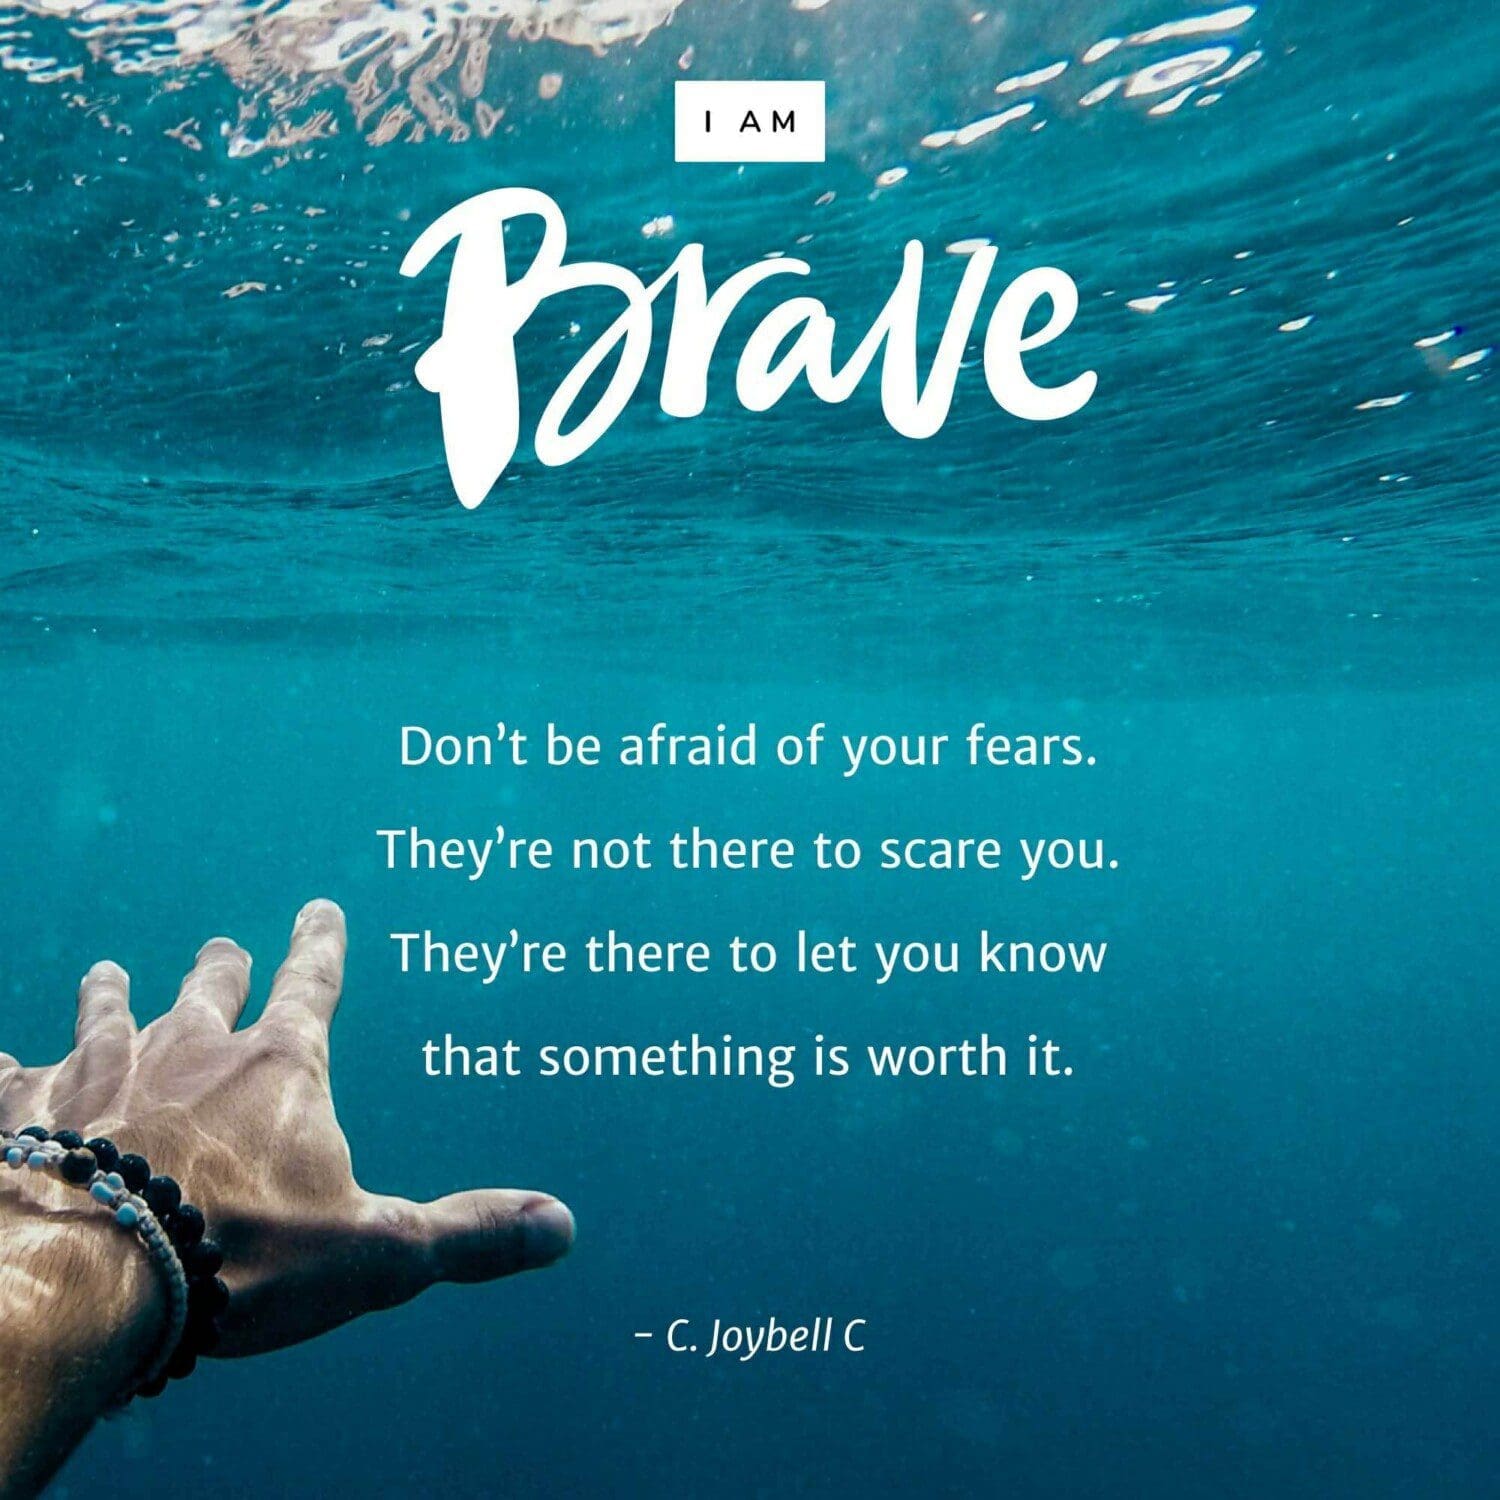 "Don’t be afraid of your fears. They’re not there to scare you. They’re there to let you know that something is worth it." – C. Joybell C